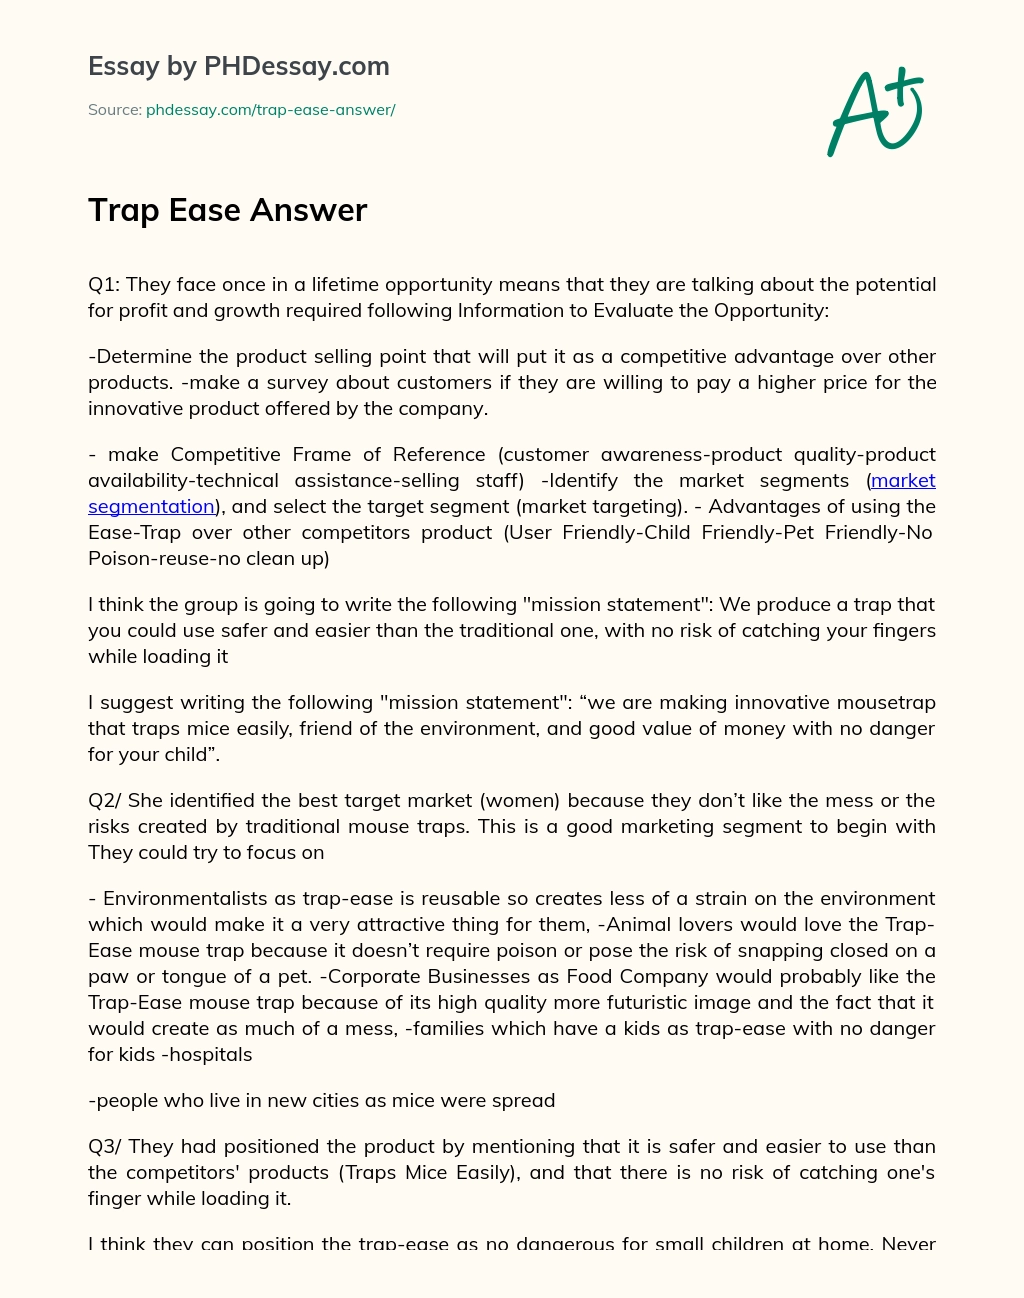 Trap Ease Answer essay